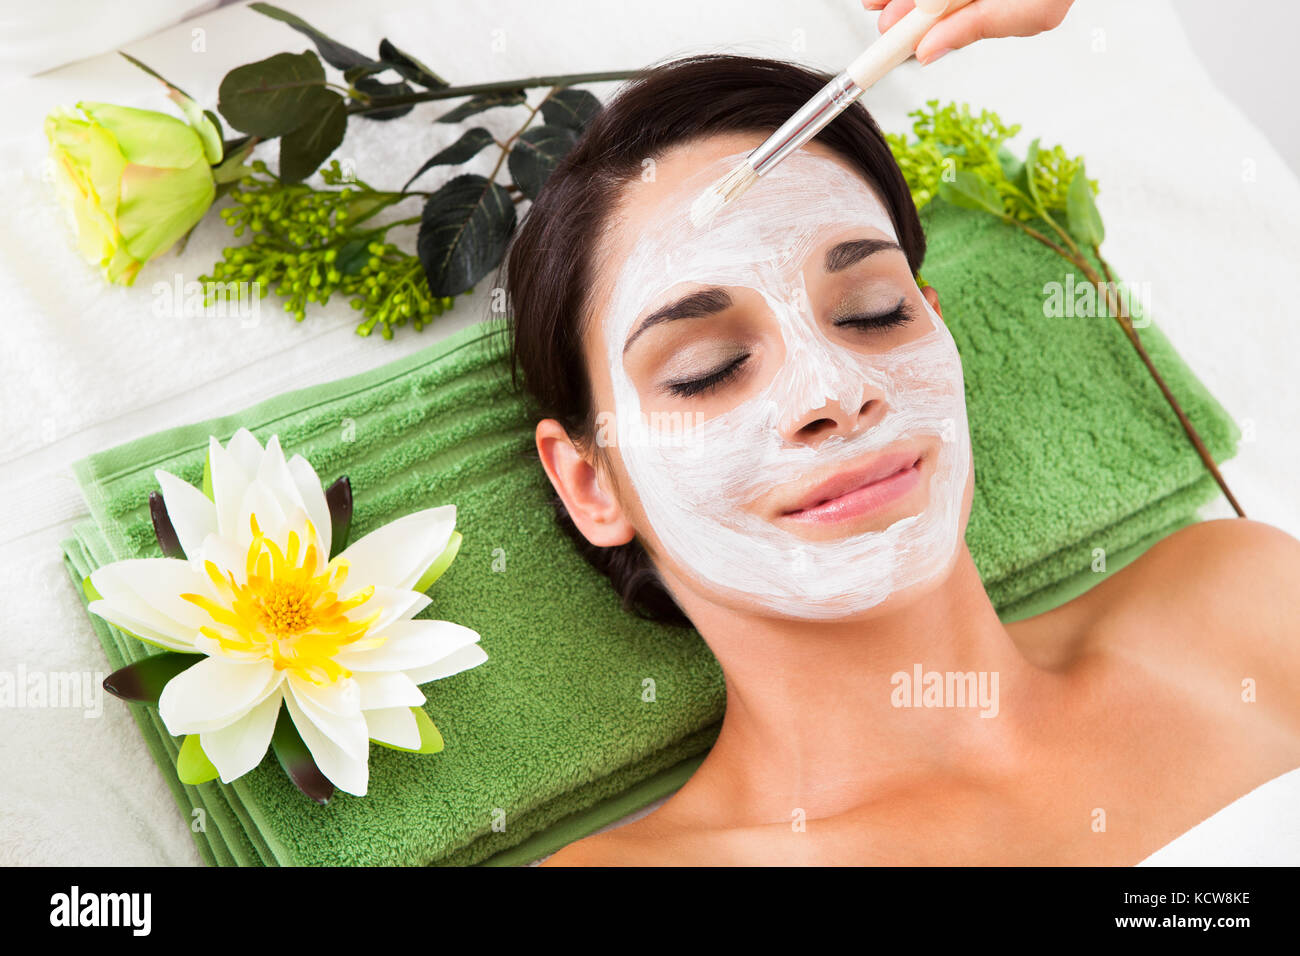 Cosmetician Applying Facial Beauty Mask For Young Woman At Spa Salon Stock Photo